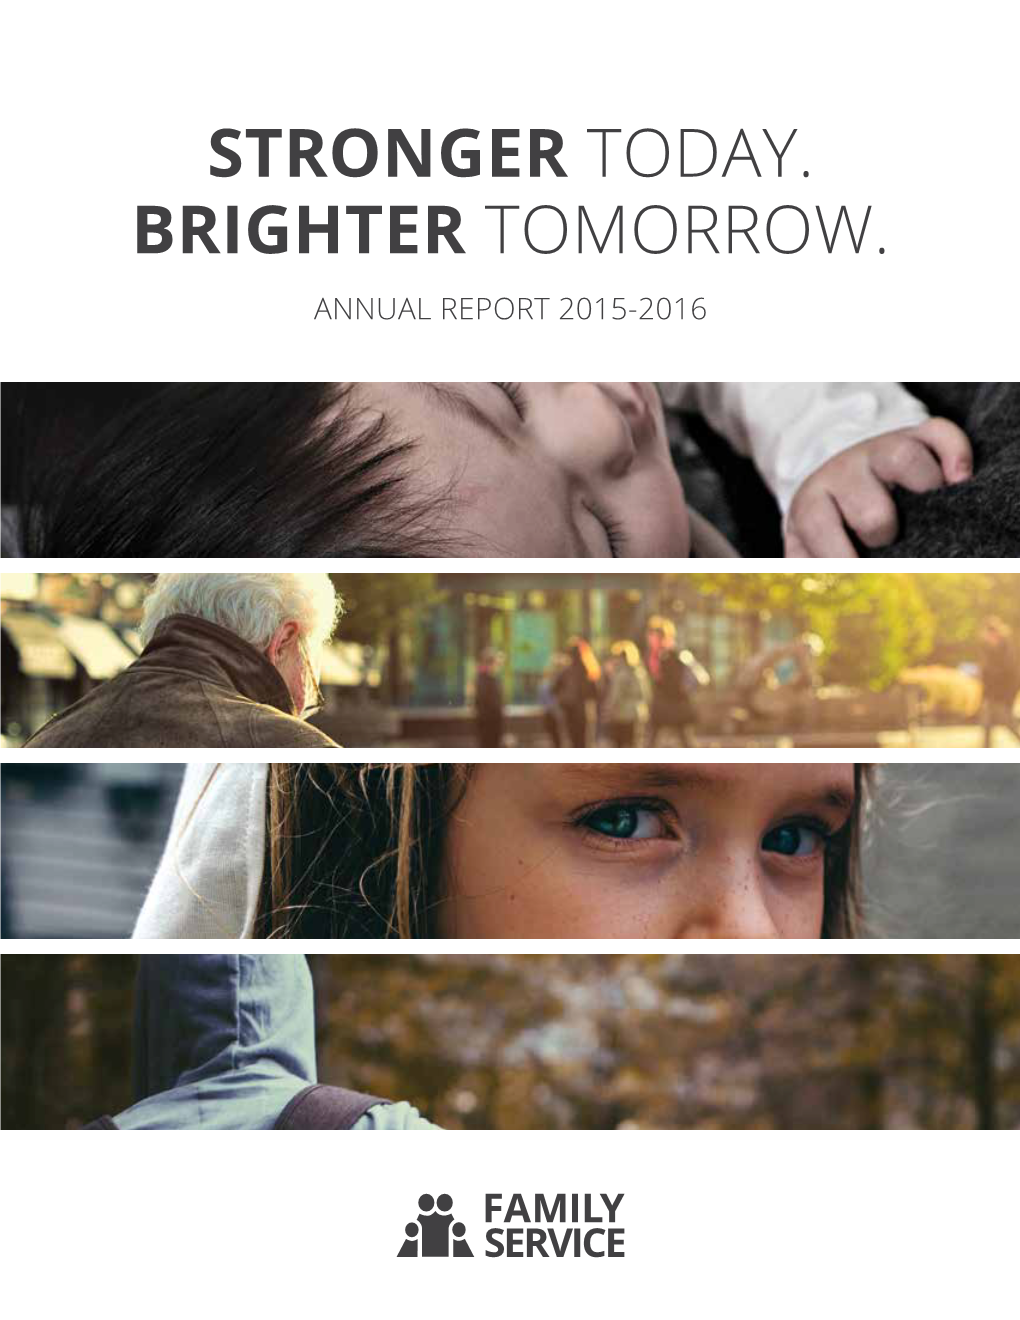 Stronger Today. Brighter Tomorrow. Annual Report 2015-2016 About Family Service Board of Directors